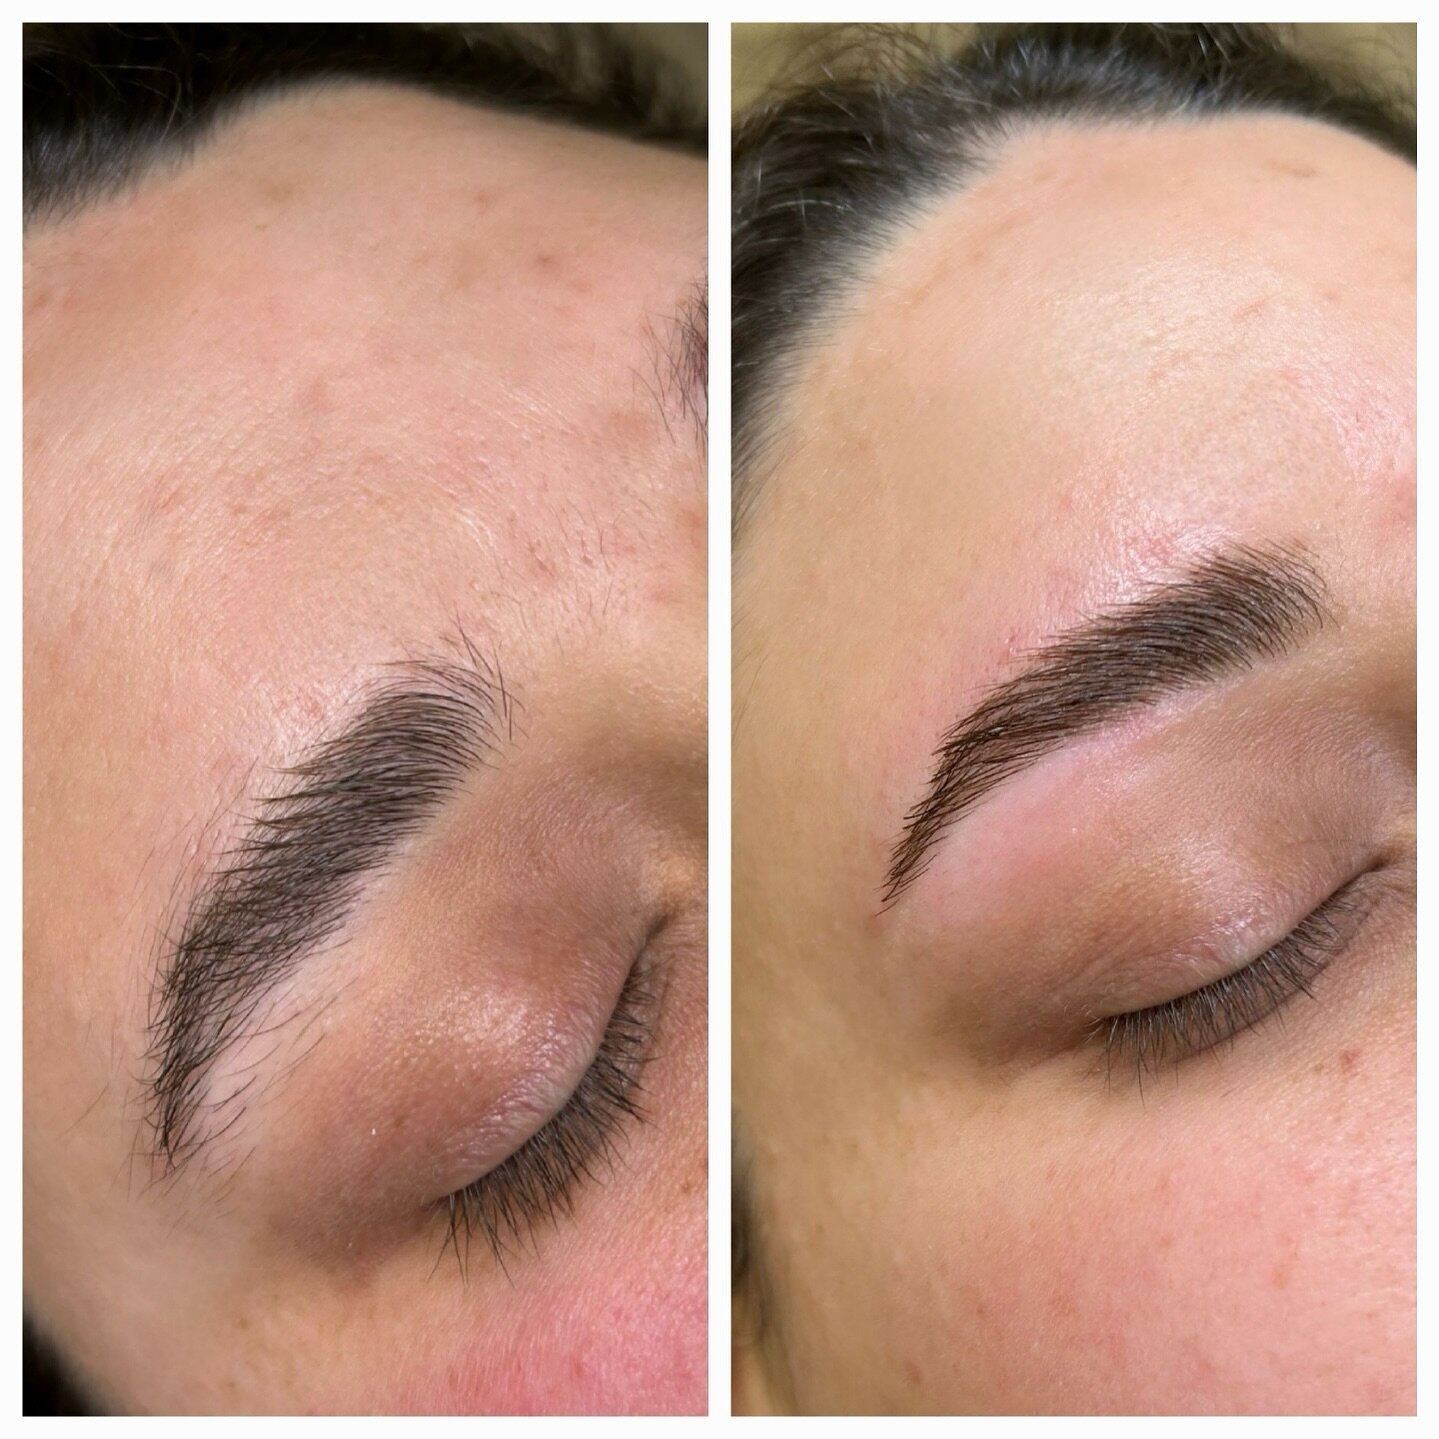 It&rsquo;s been a while since I&rsquo;ve posted any before/afters. So why not start this new month with a natural, fluffy looking brow lamination!

📲Link in bio to schedule your appointment 
.
.
.
#wowlashandbrowstudio #riverbank #california #centra